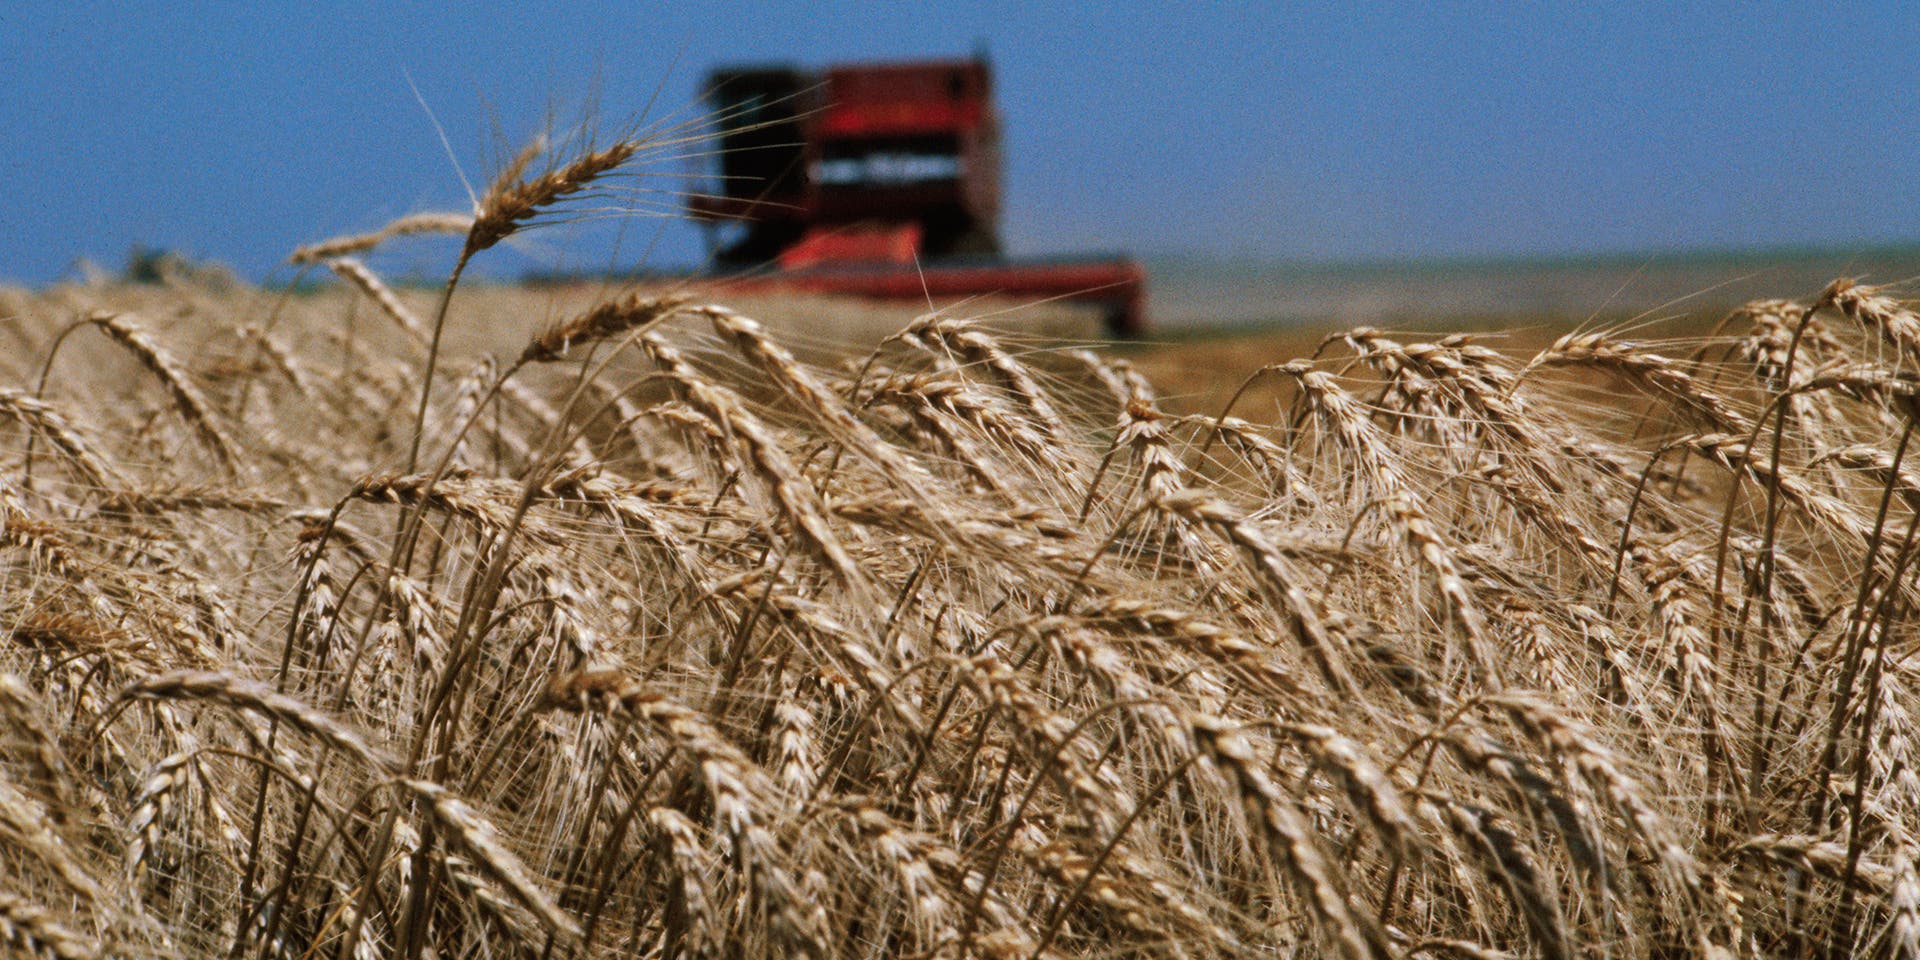 A field of wheat, with tractor in the background, in Pawnee County, Kansas.